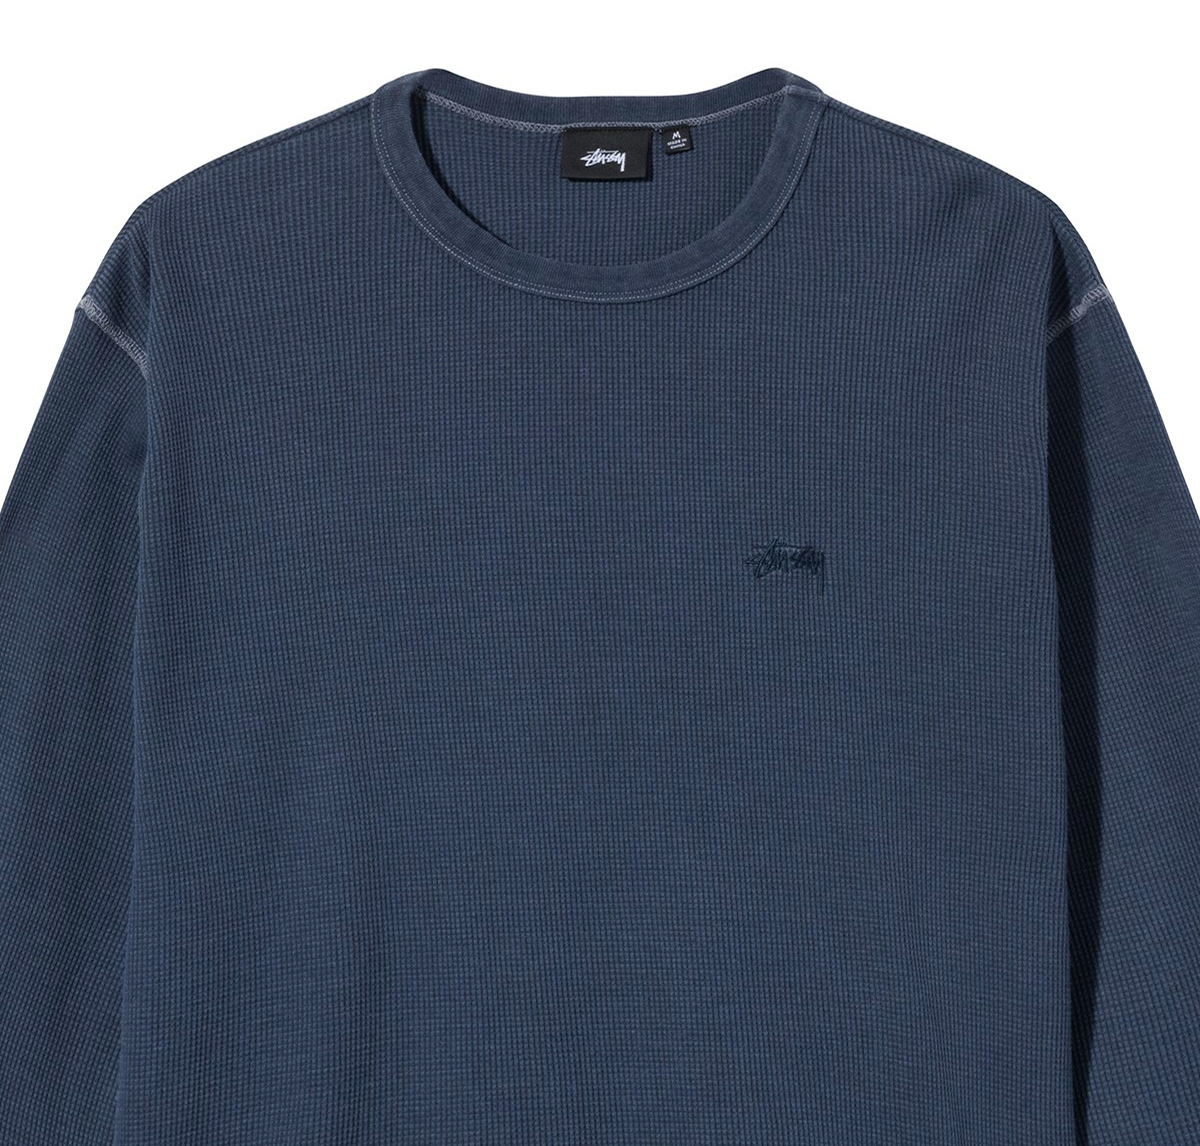 Stüssy Dyed Thermal - Navy front detail